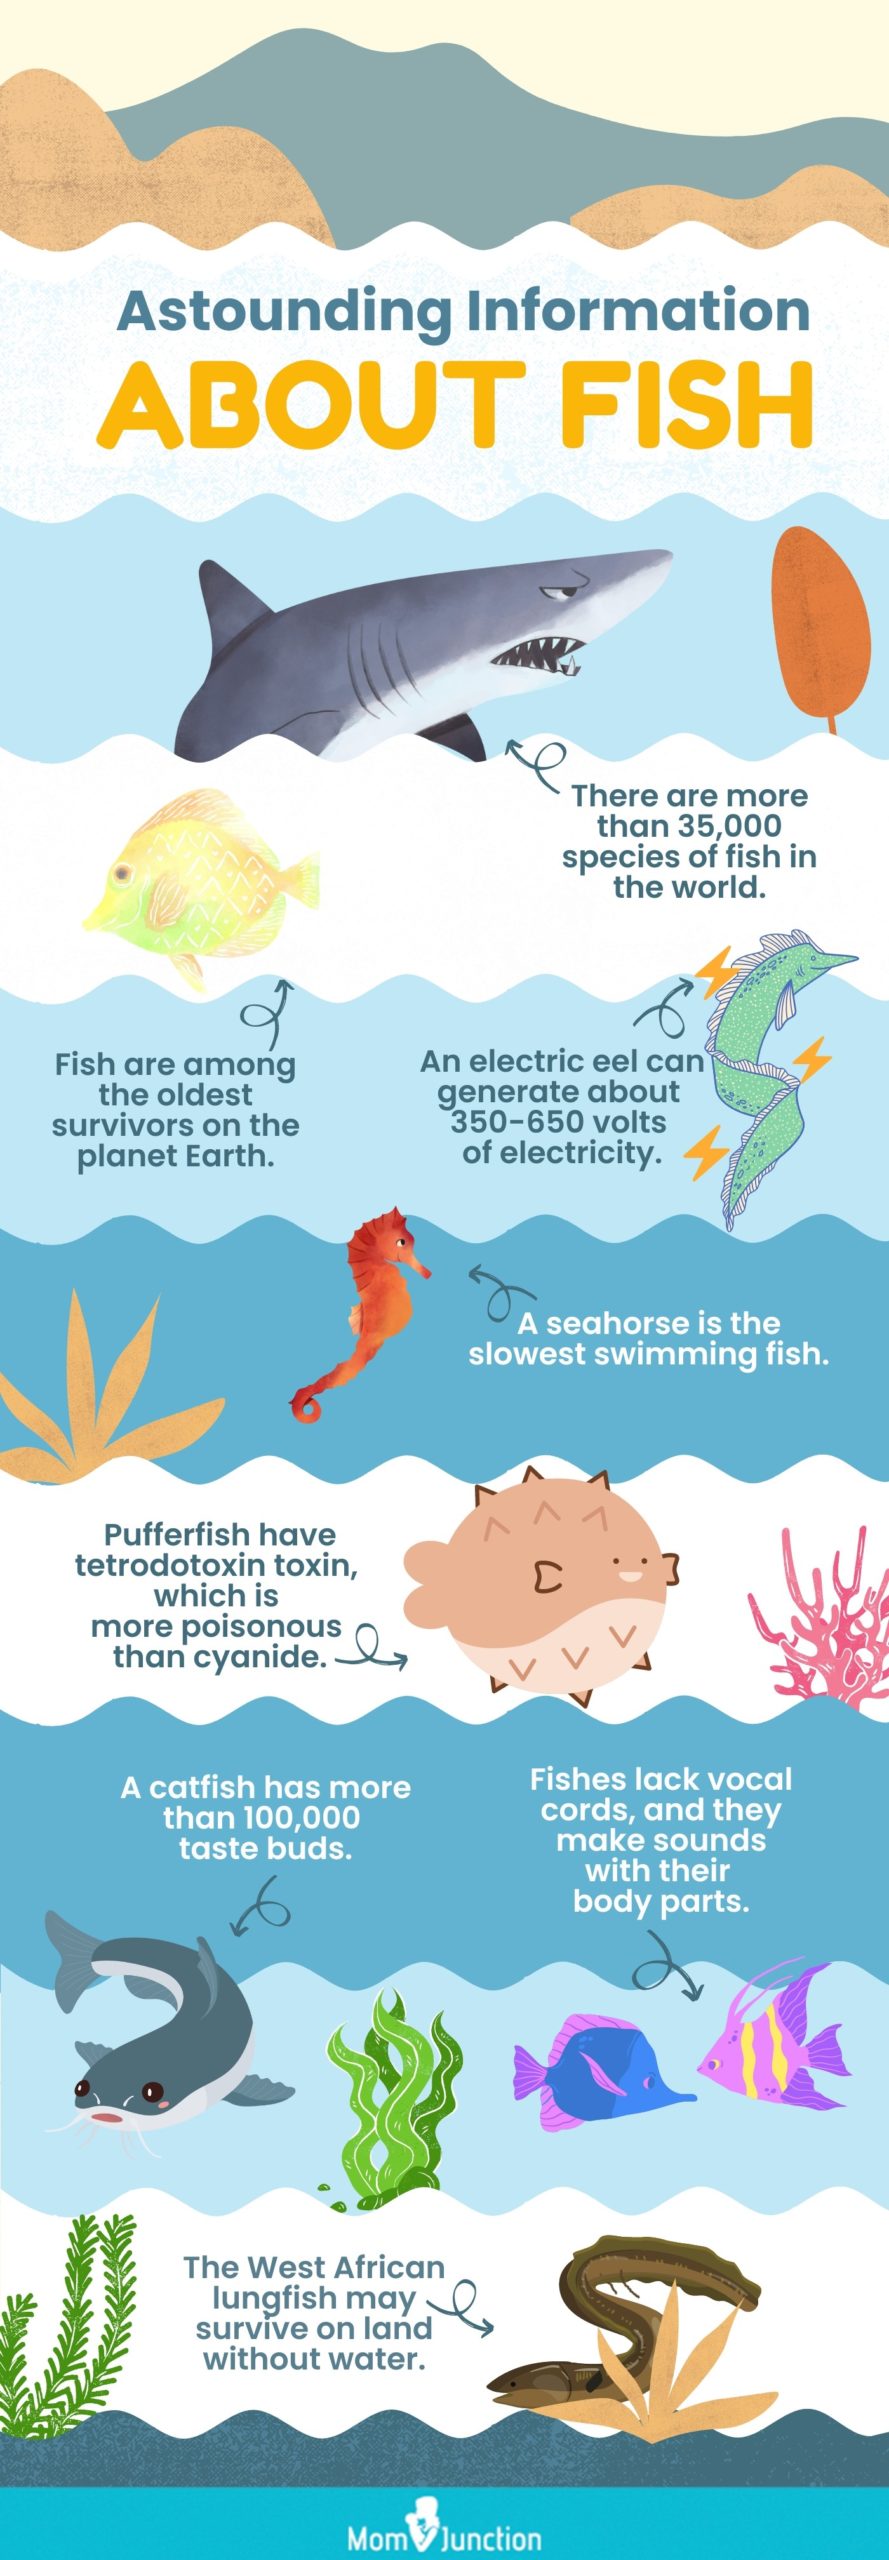 astounding information about fish (infographic)